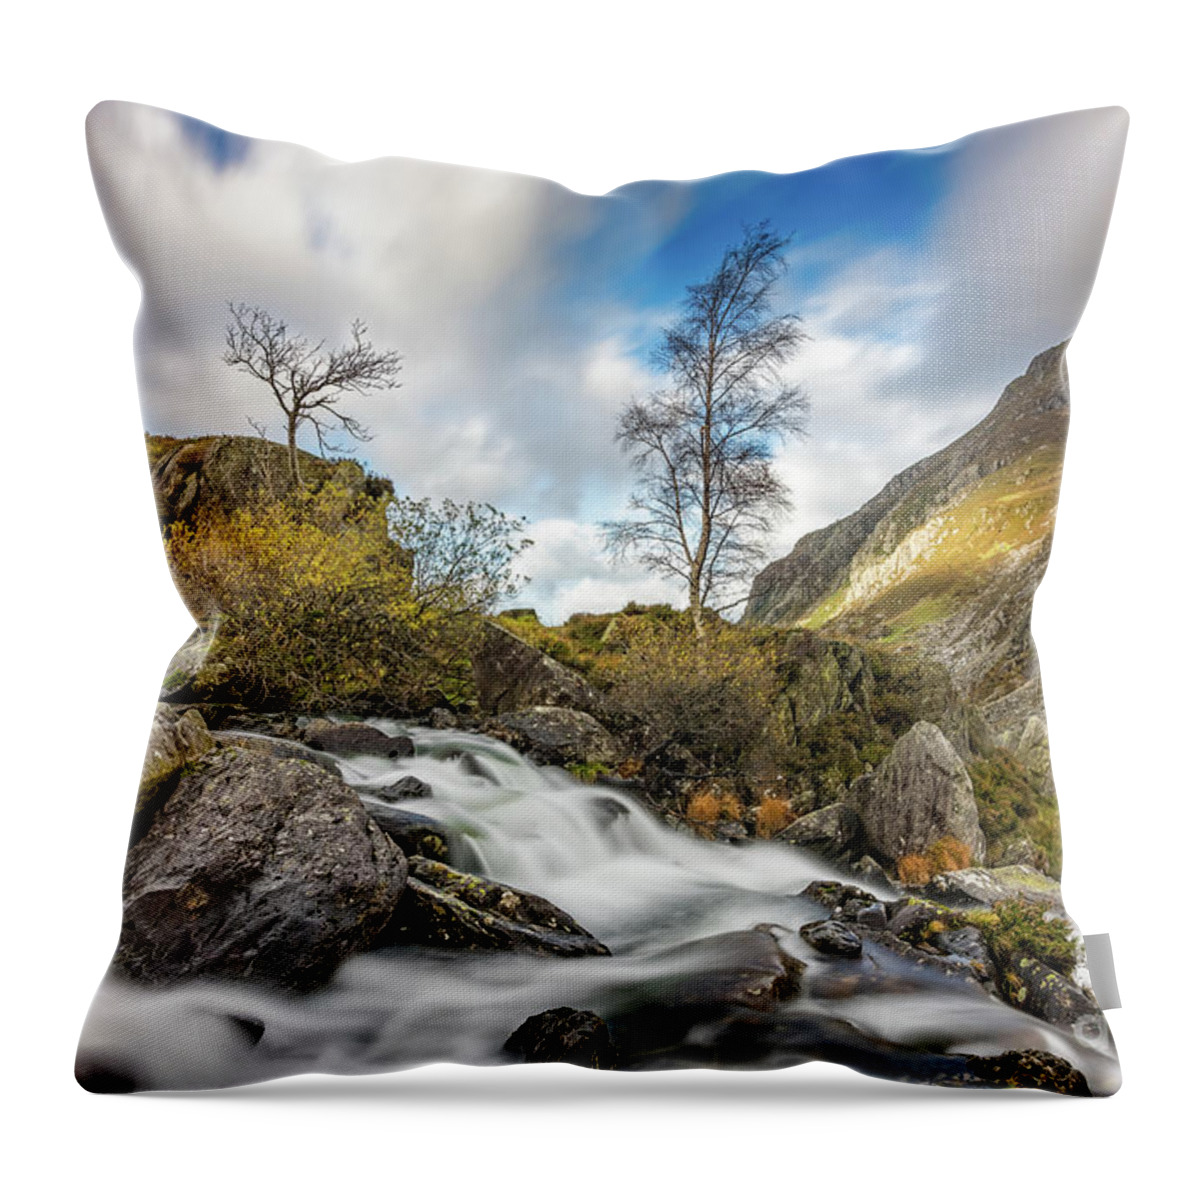 Cwm Idwal Throw Pillow featuring the photograph Soothing Waters Snowdonia by Adrian Evans